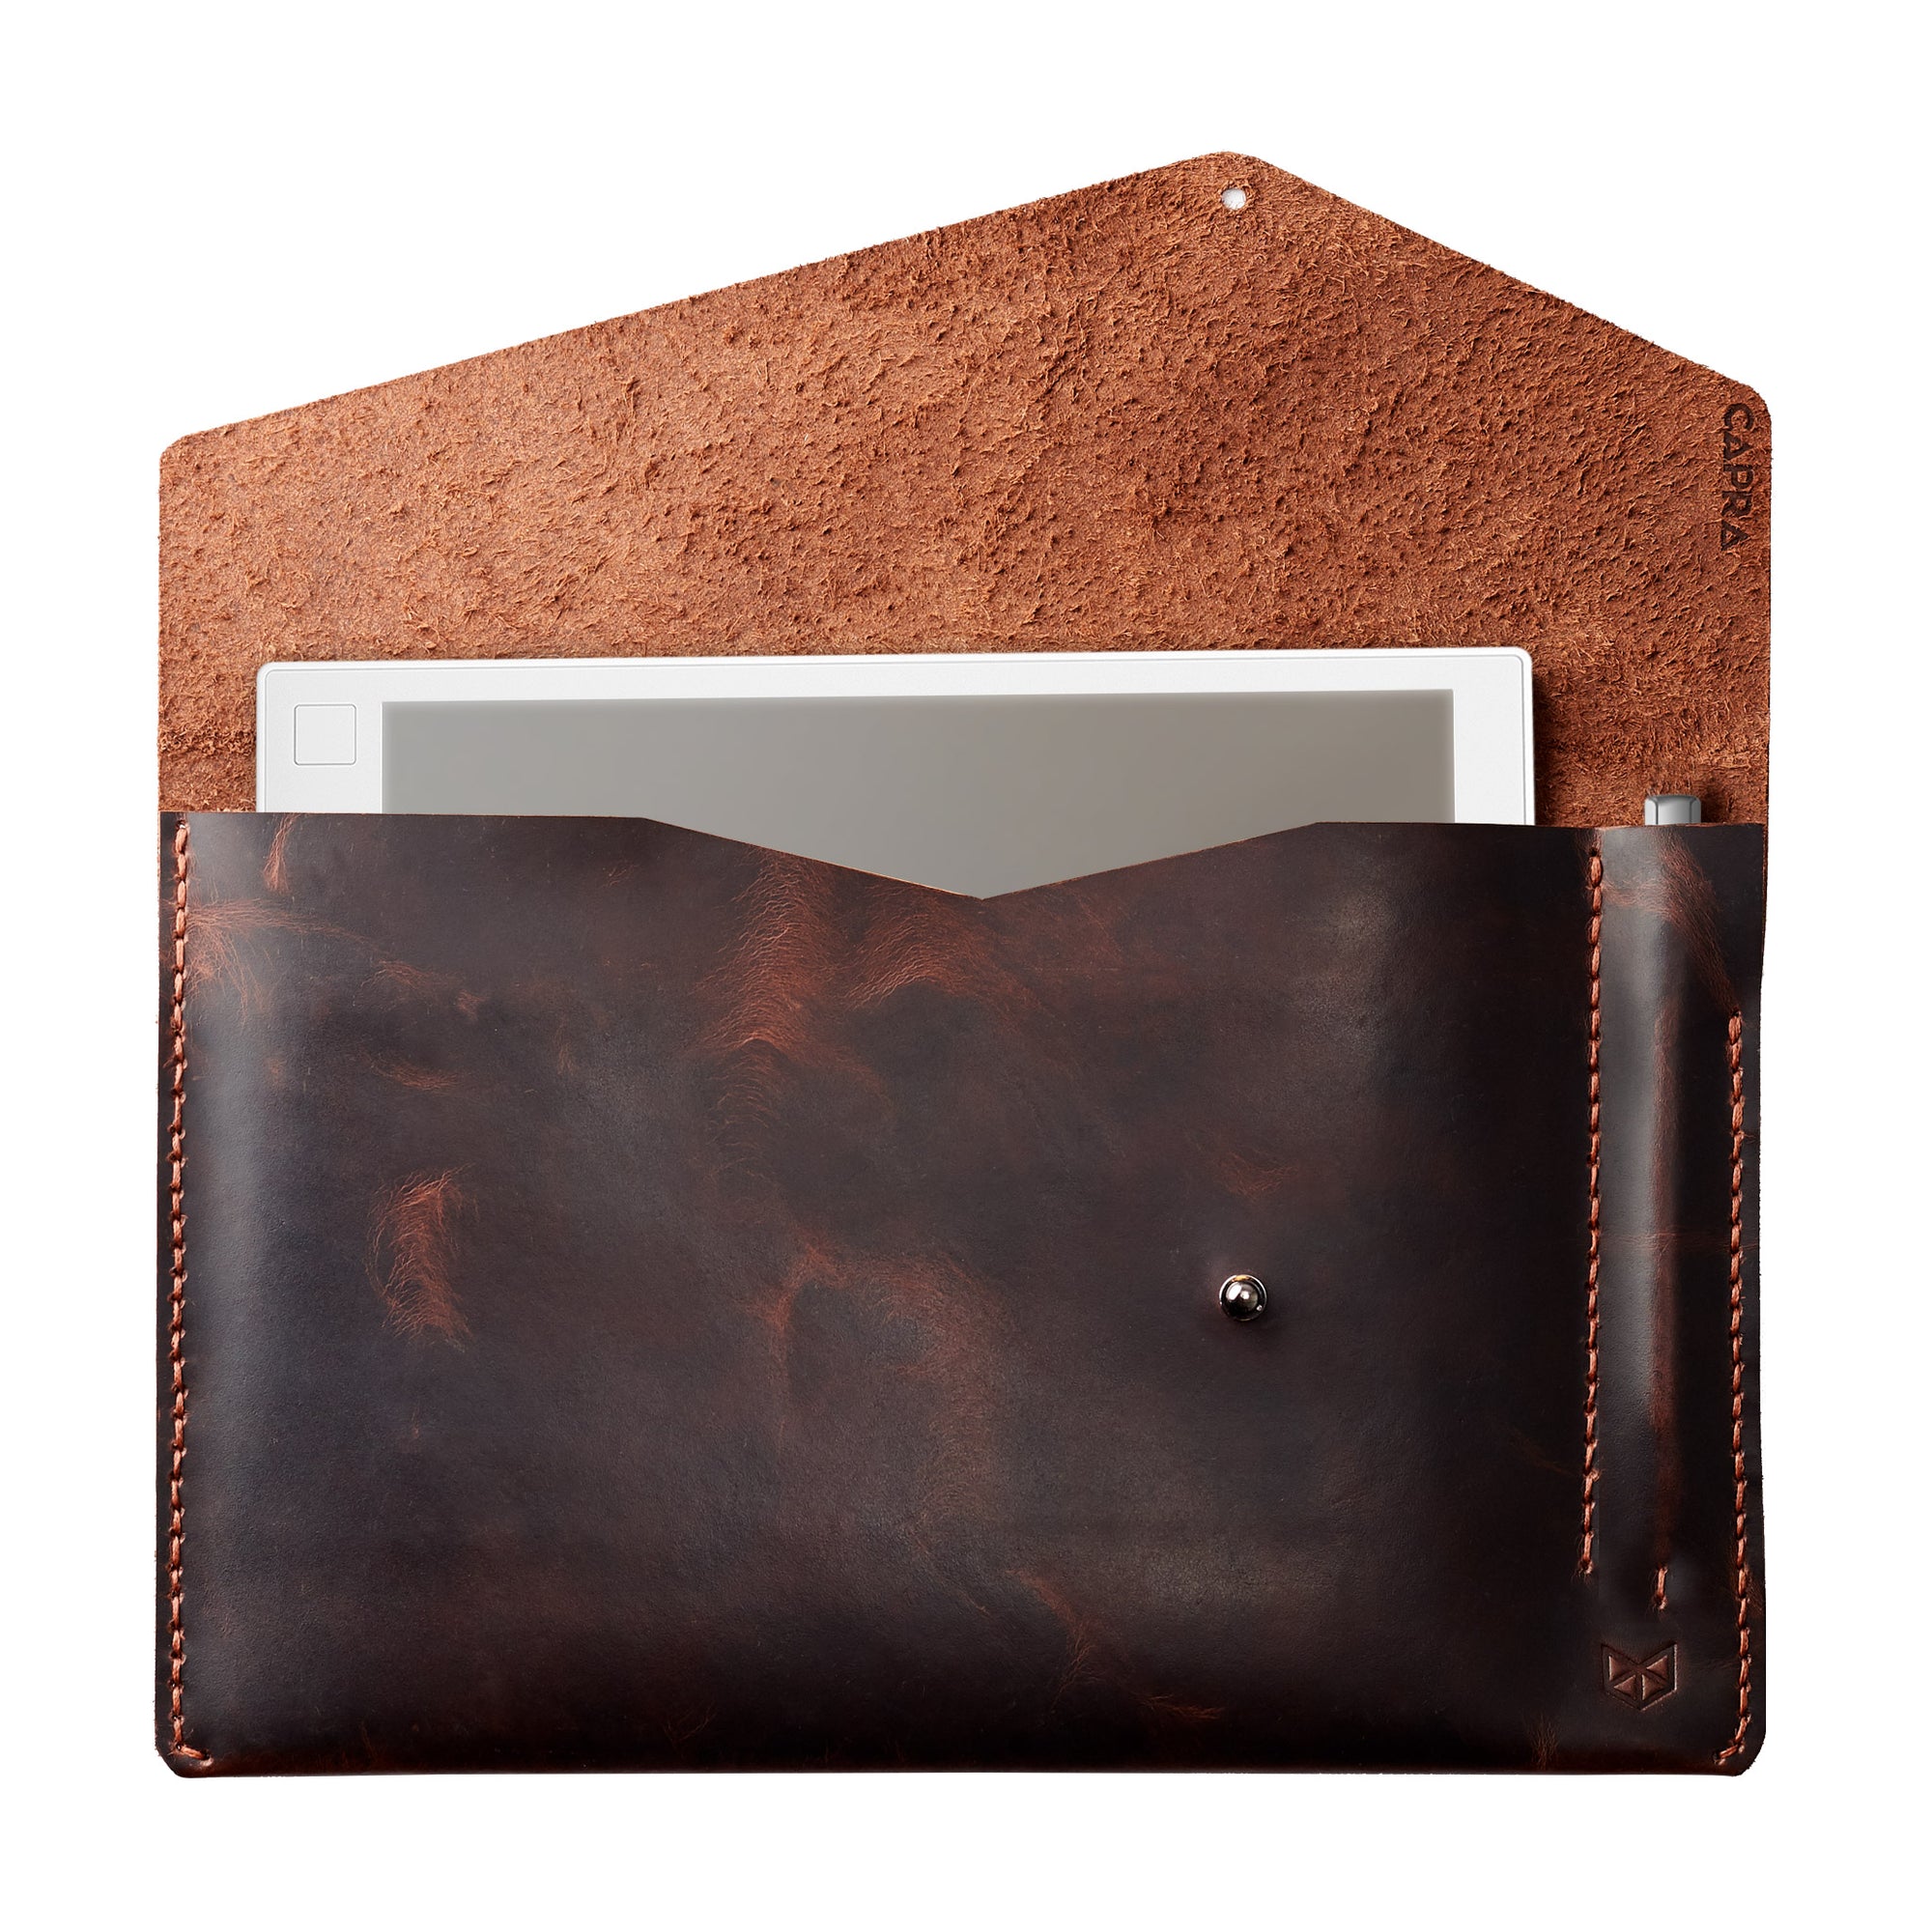 Style front view. Cognac draftsman 5 case by Capra Leather. Remarkable sleeve.